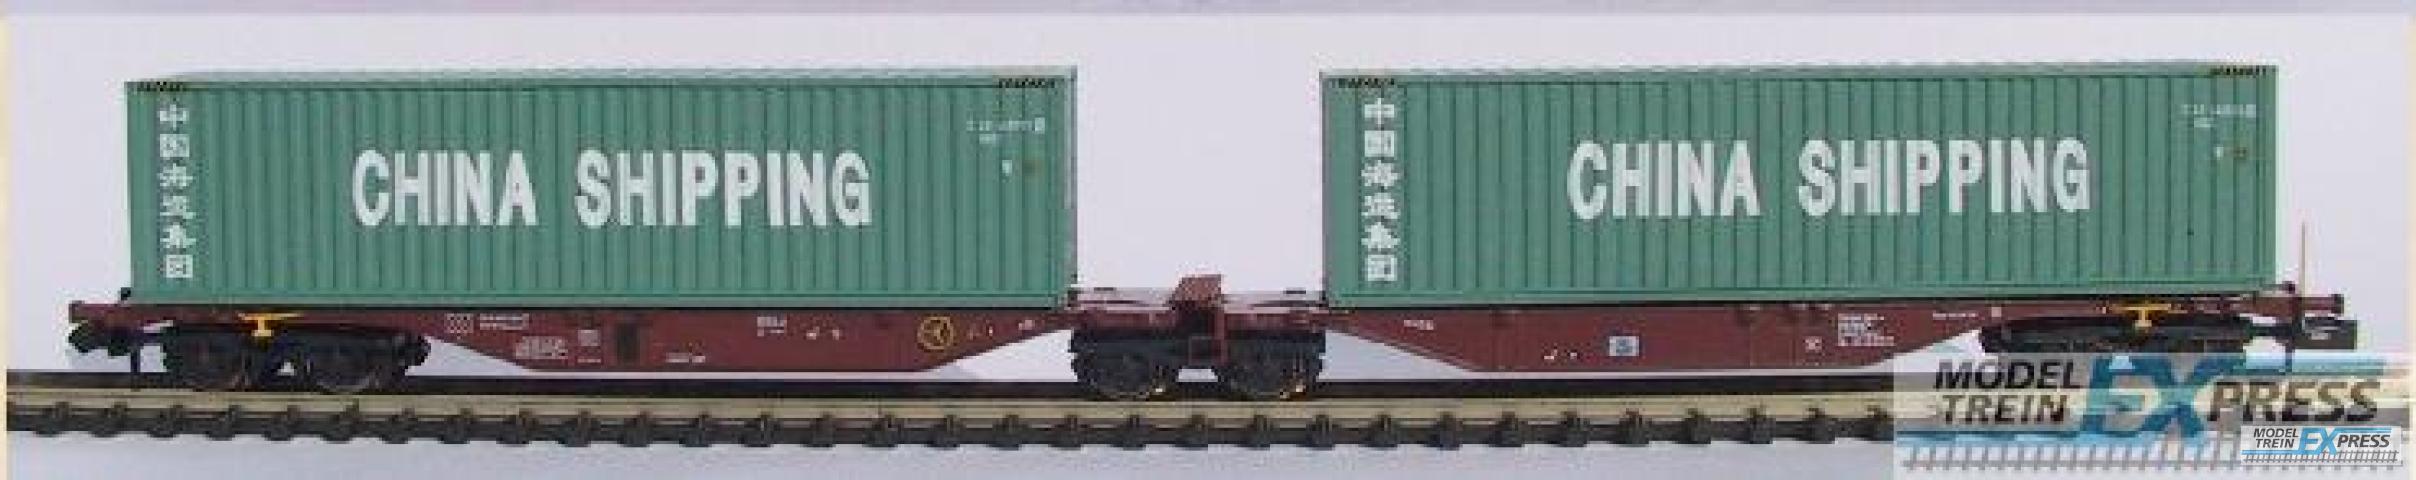 Rocky-Rail 60118 Sggmrss 90 NMBS/Touax (rood-bruin) met 2x China Shipping